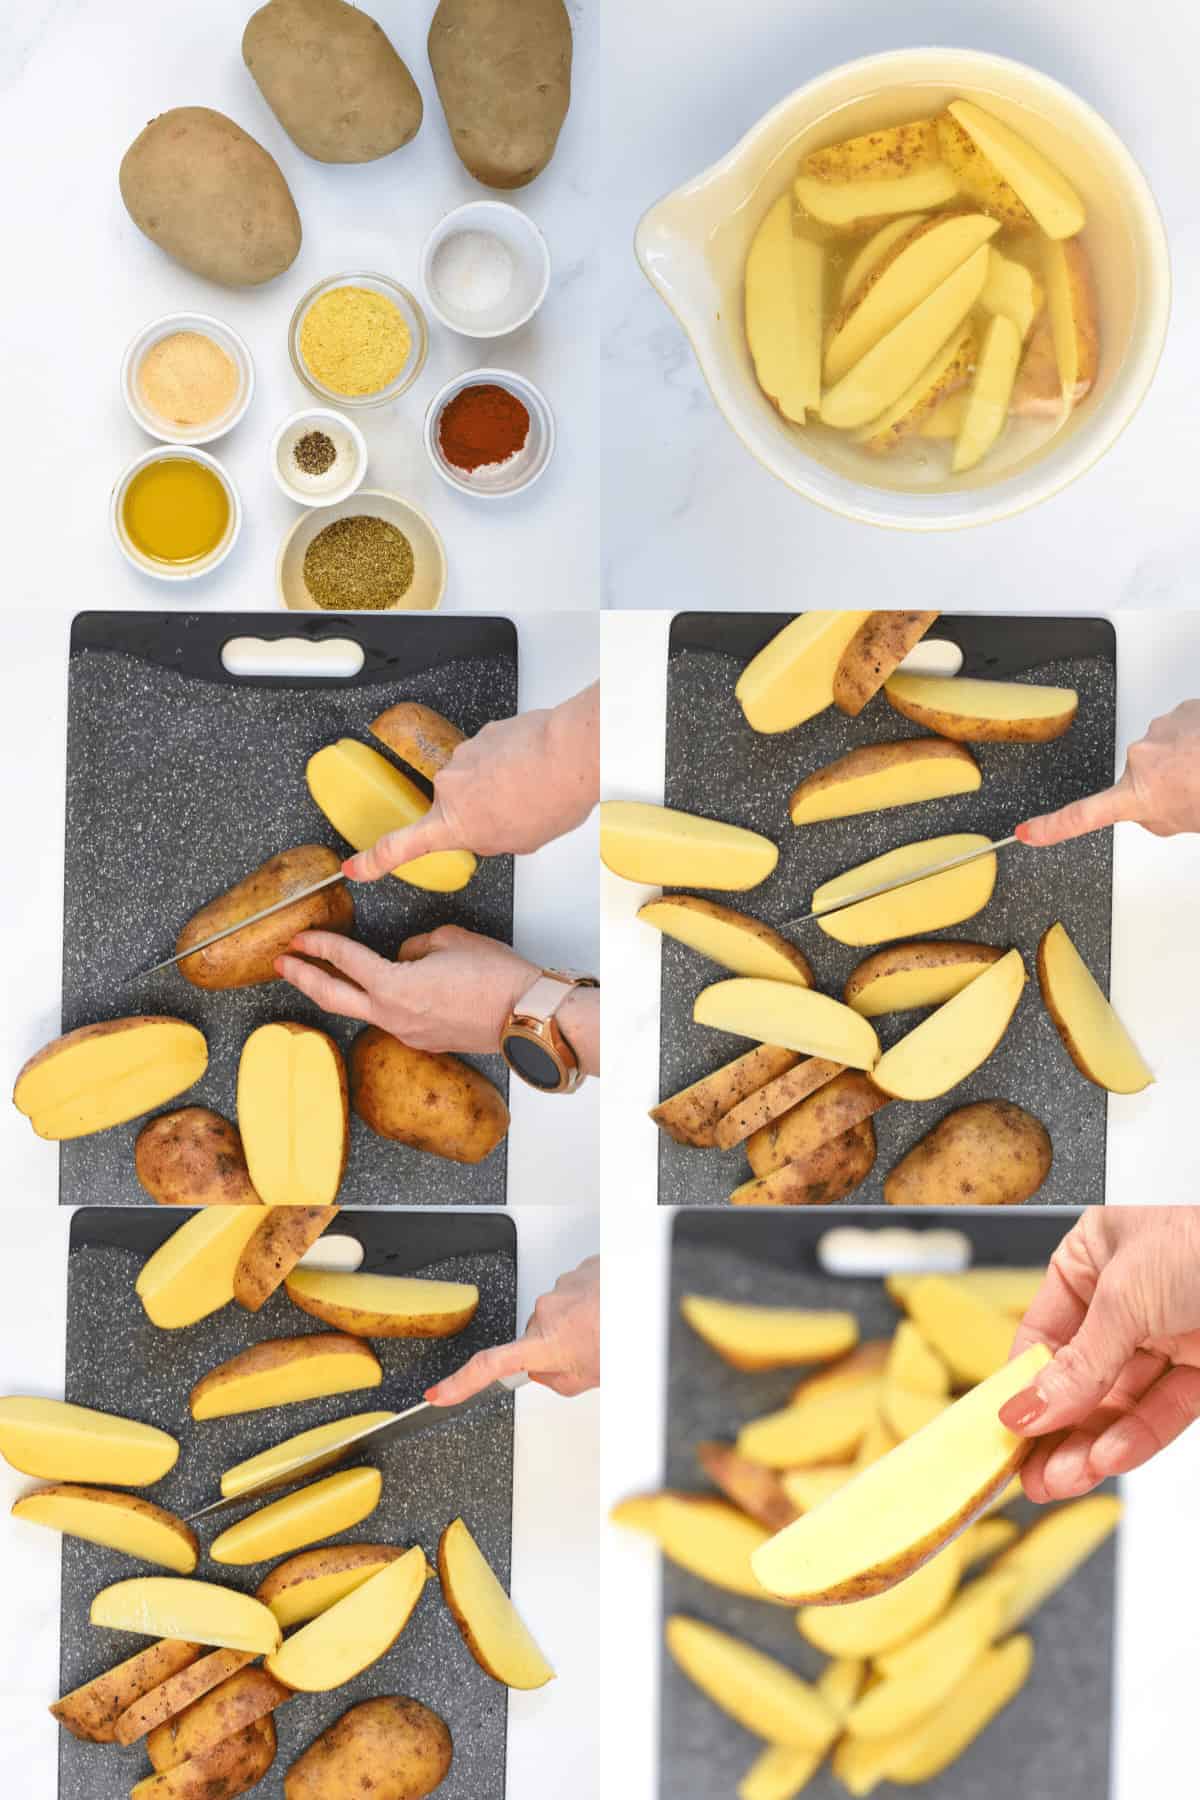 How To Make Potato Wedges in Air Fryer